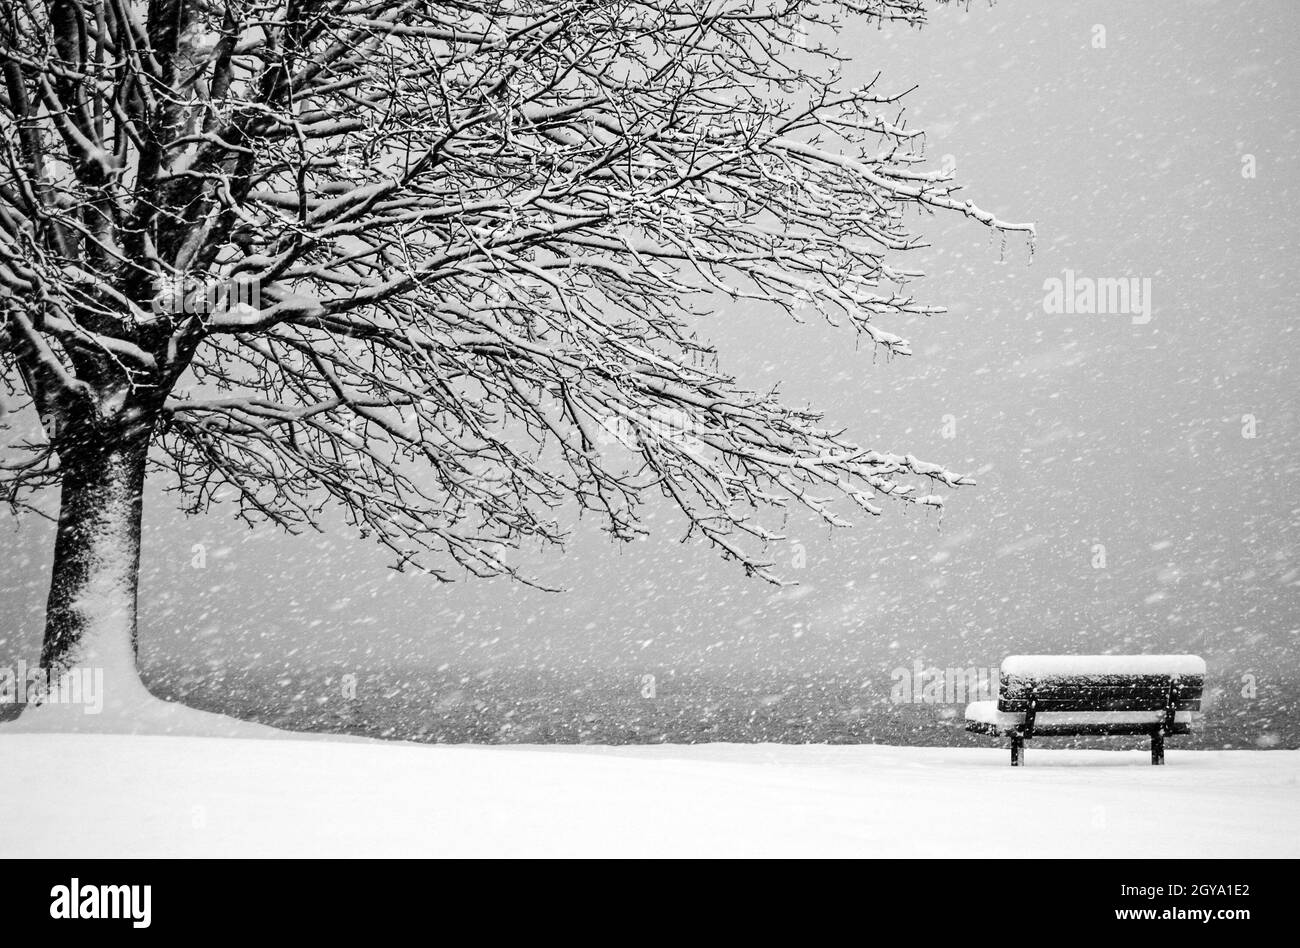 A snow covered park bench and tree Stock Photo